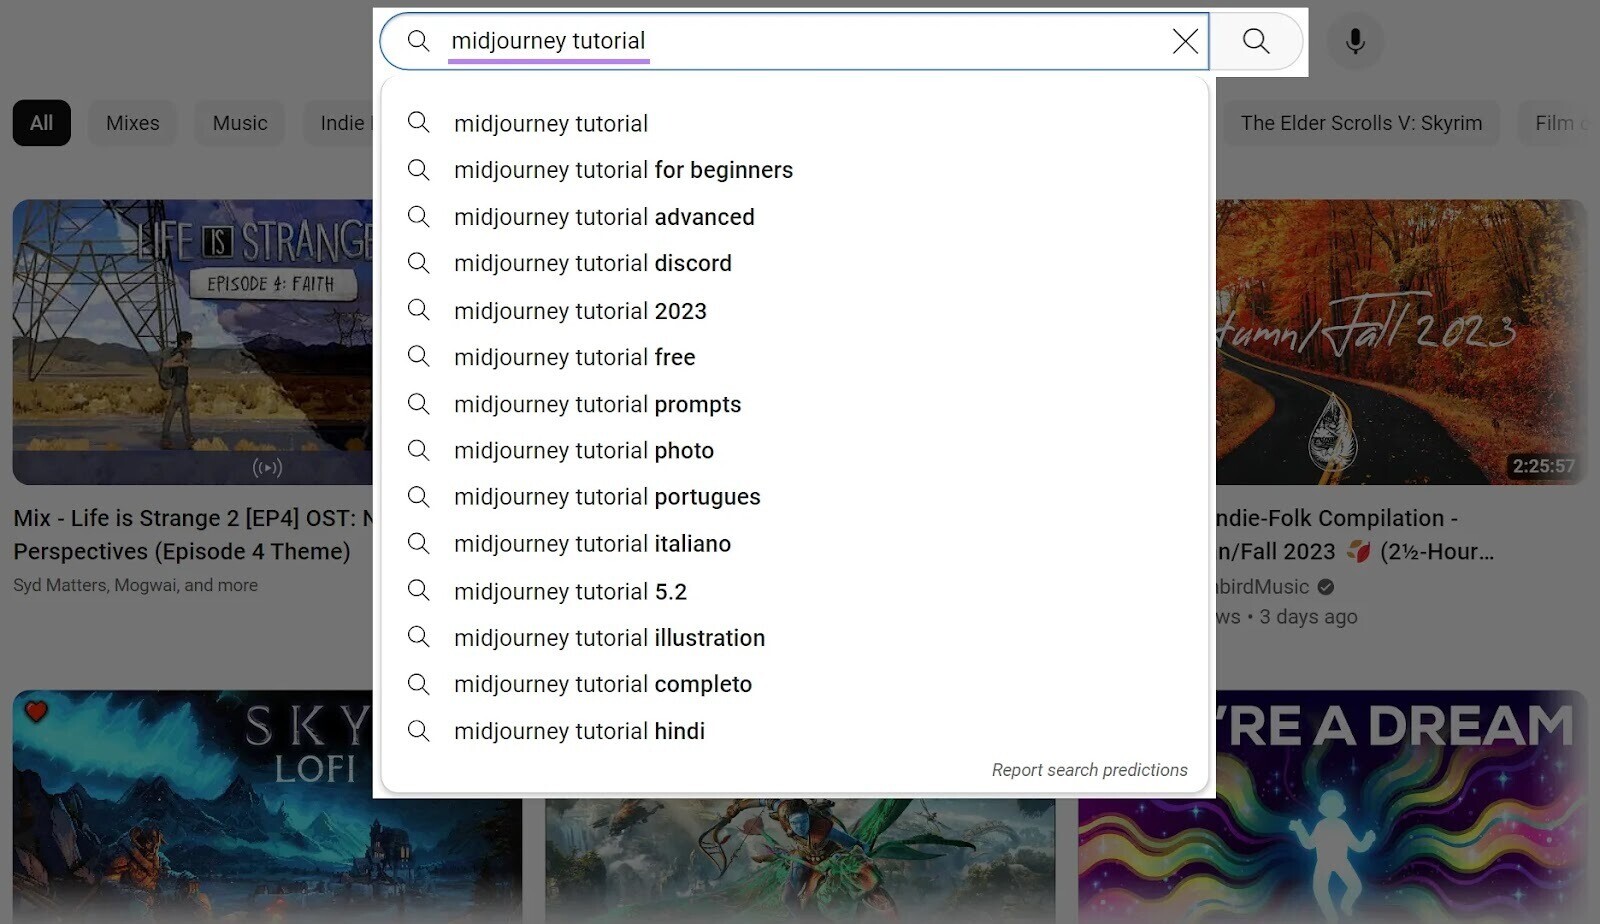 "midjourney tutorial" entered in YouTube’s search bar